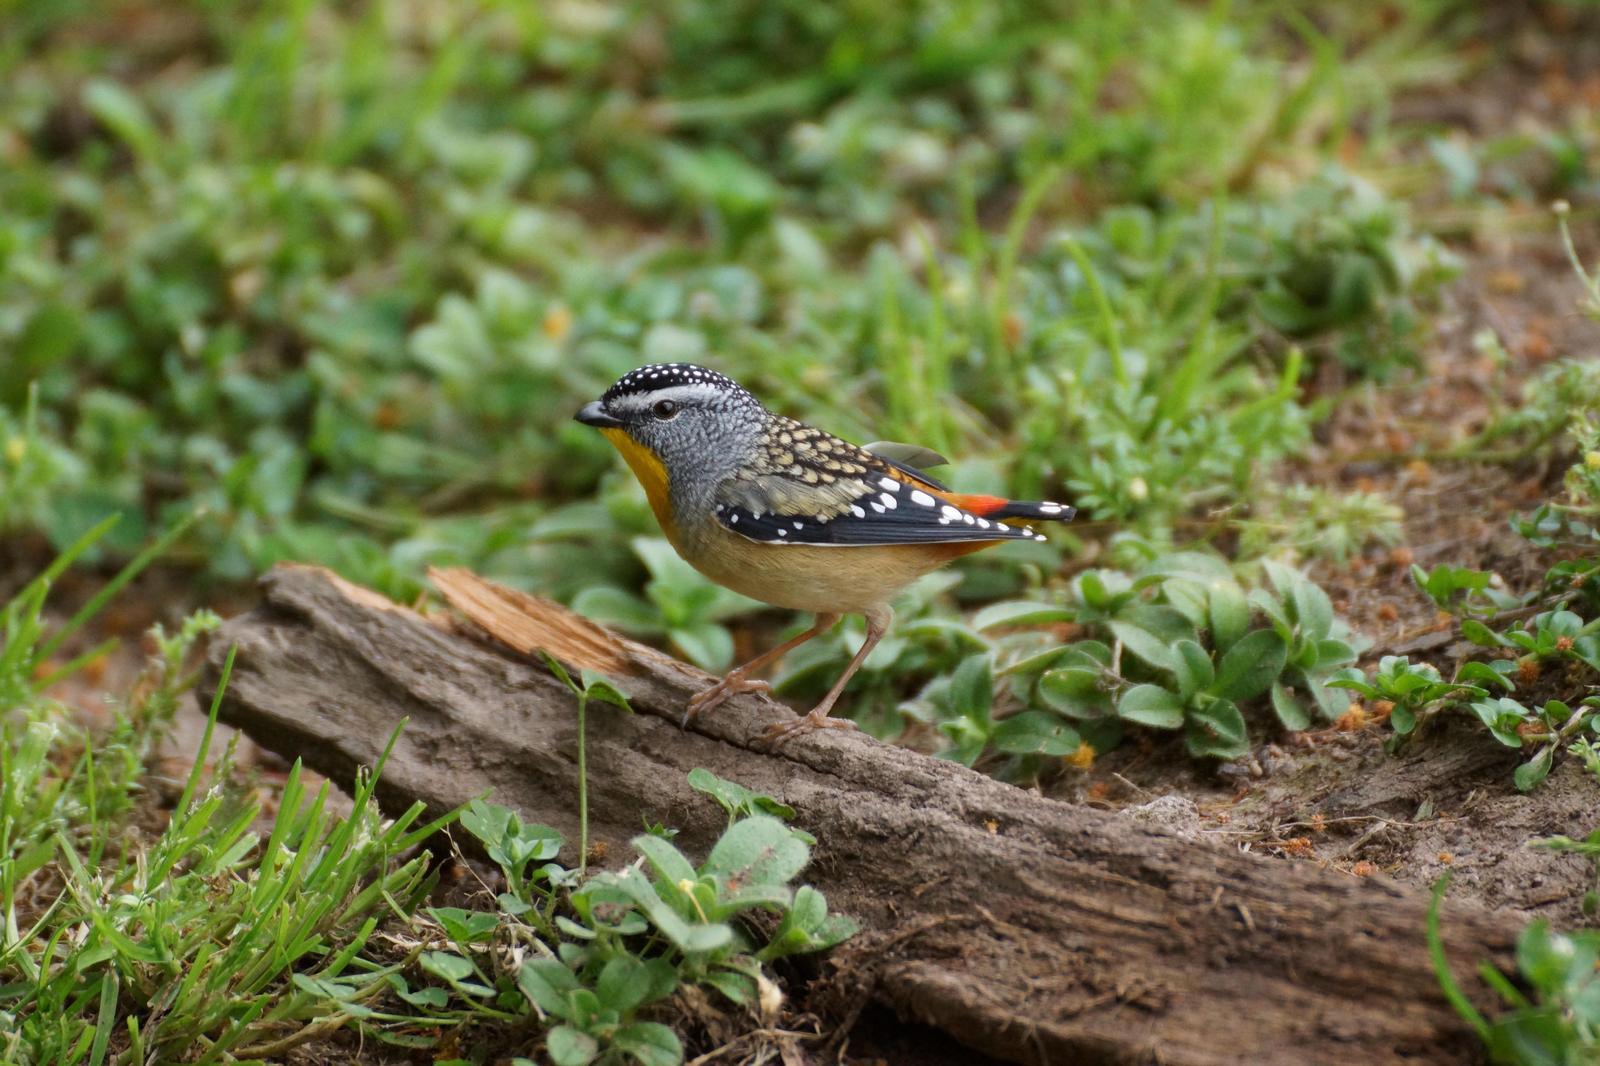 Spotted Pardalote Photo by Reuben Worseldine